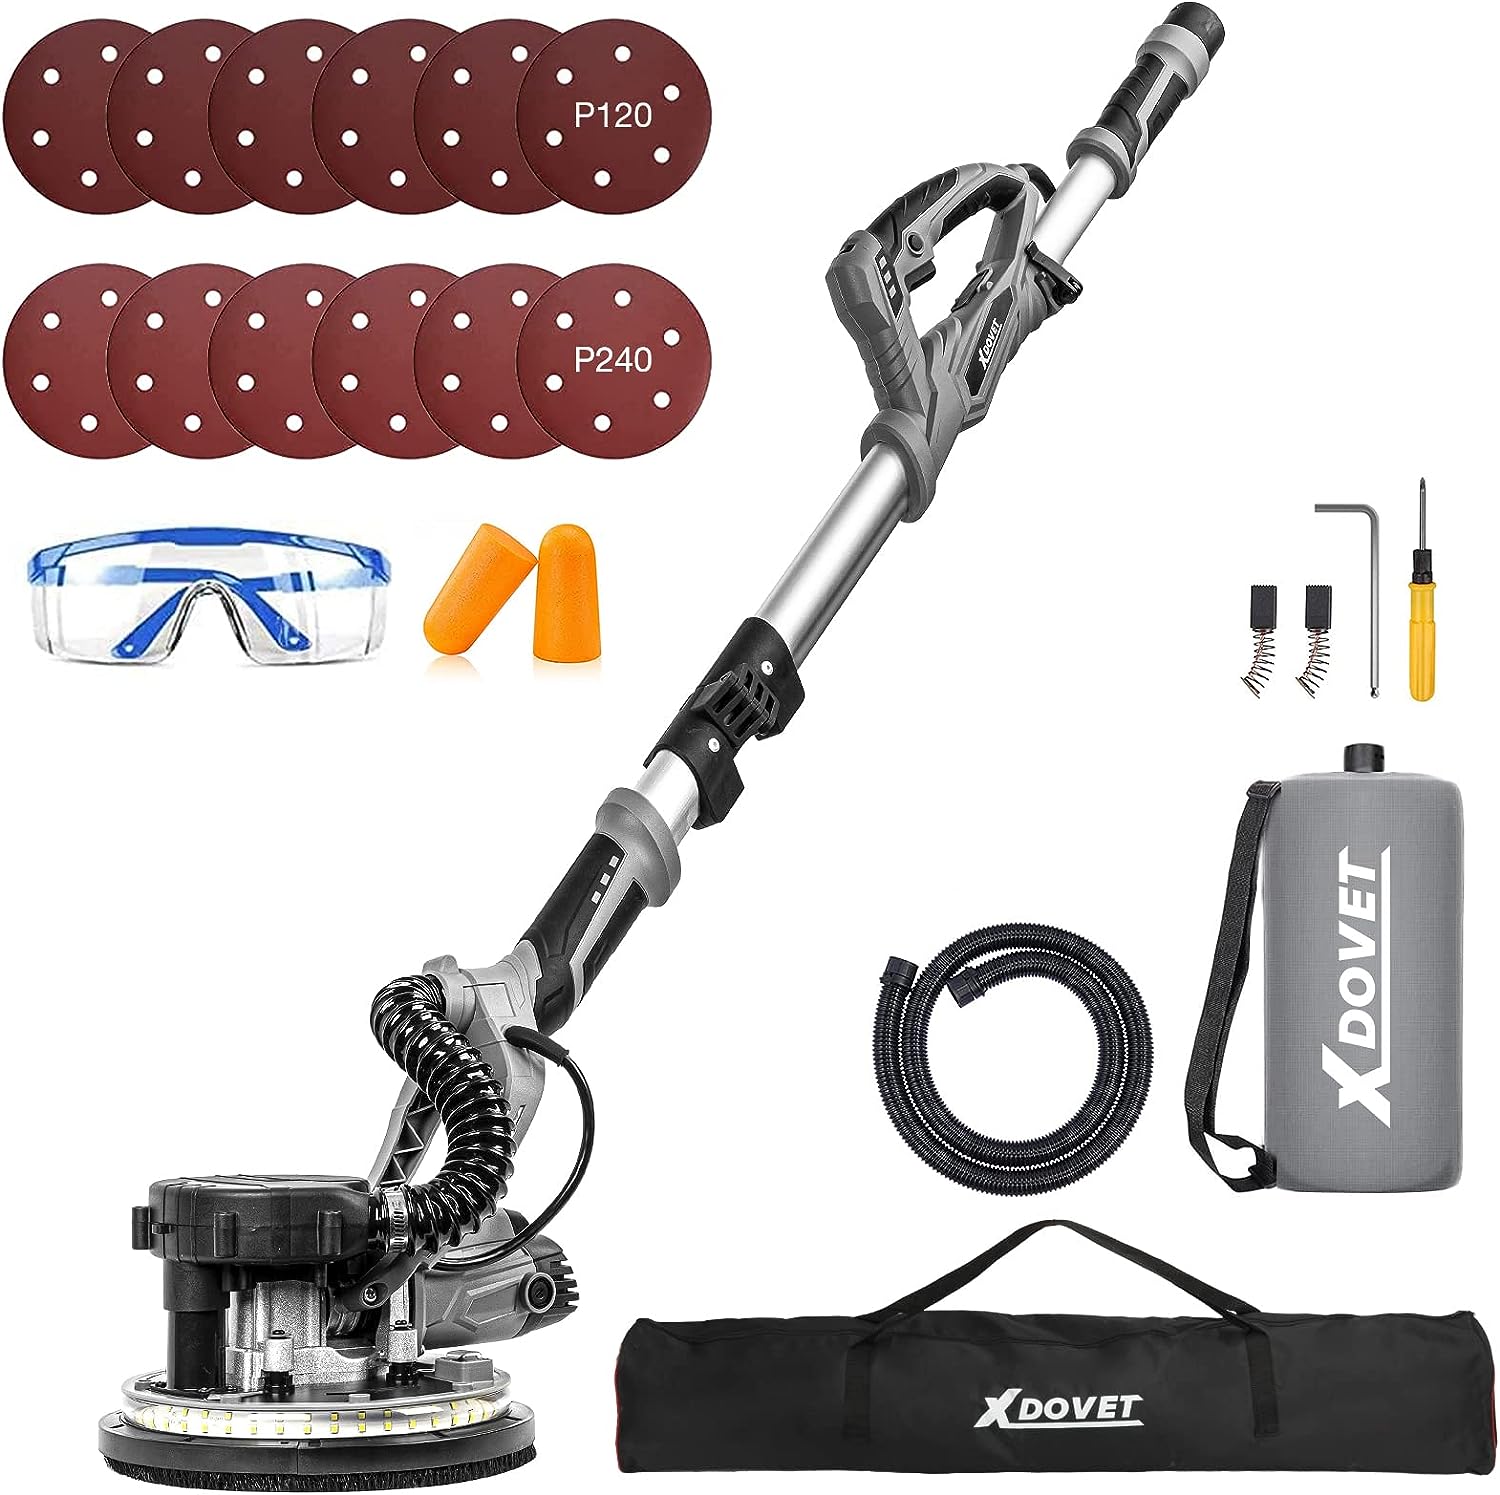 XDOVET Drywall Sander, 900W Electric Sander with 24 Pc [...]